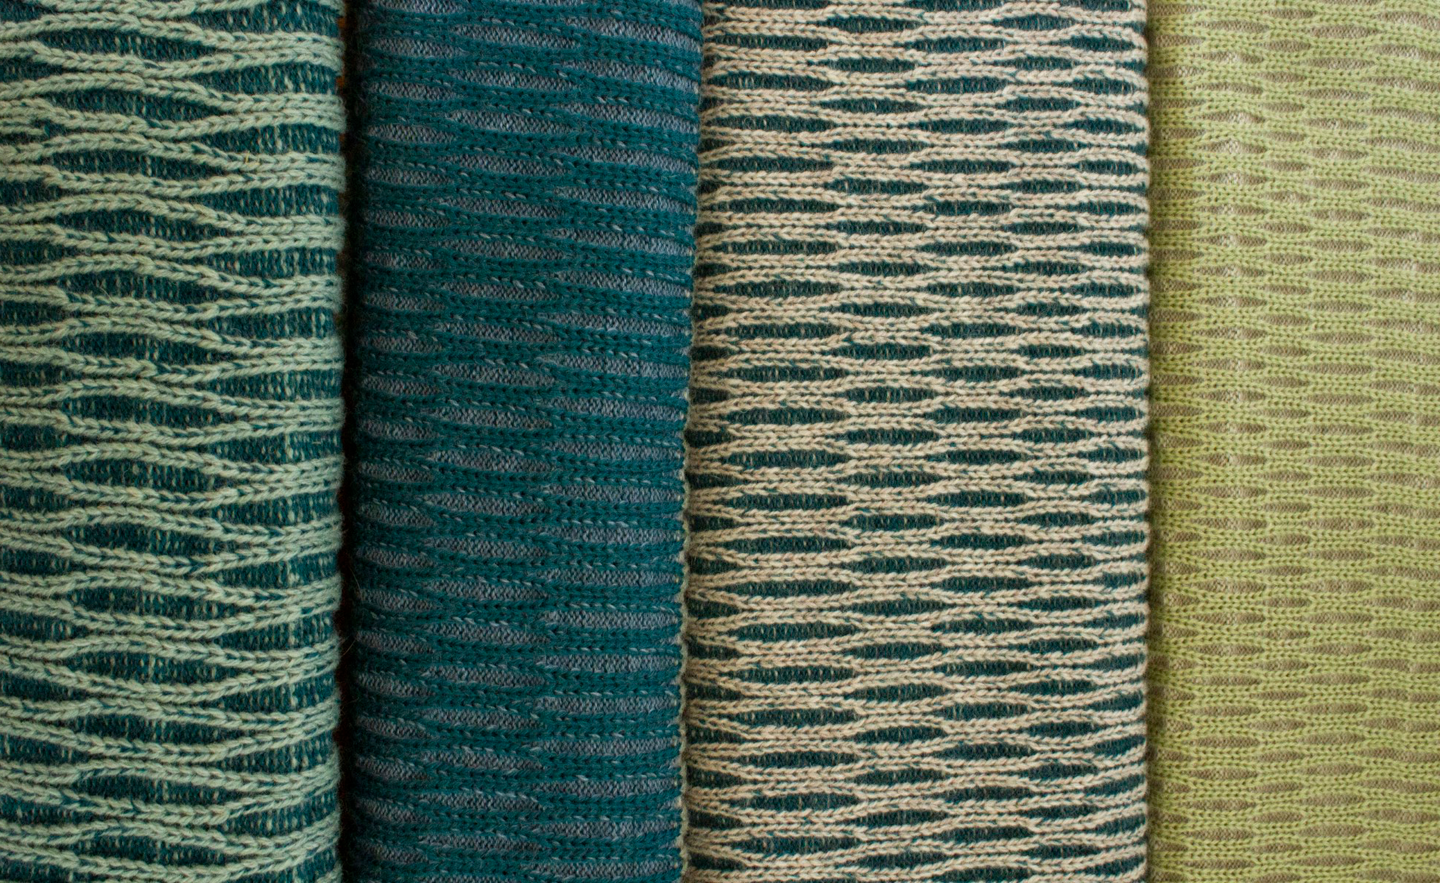 The image shows a closeup of four different patterned samples of knitted fabric, in blue and green tones.